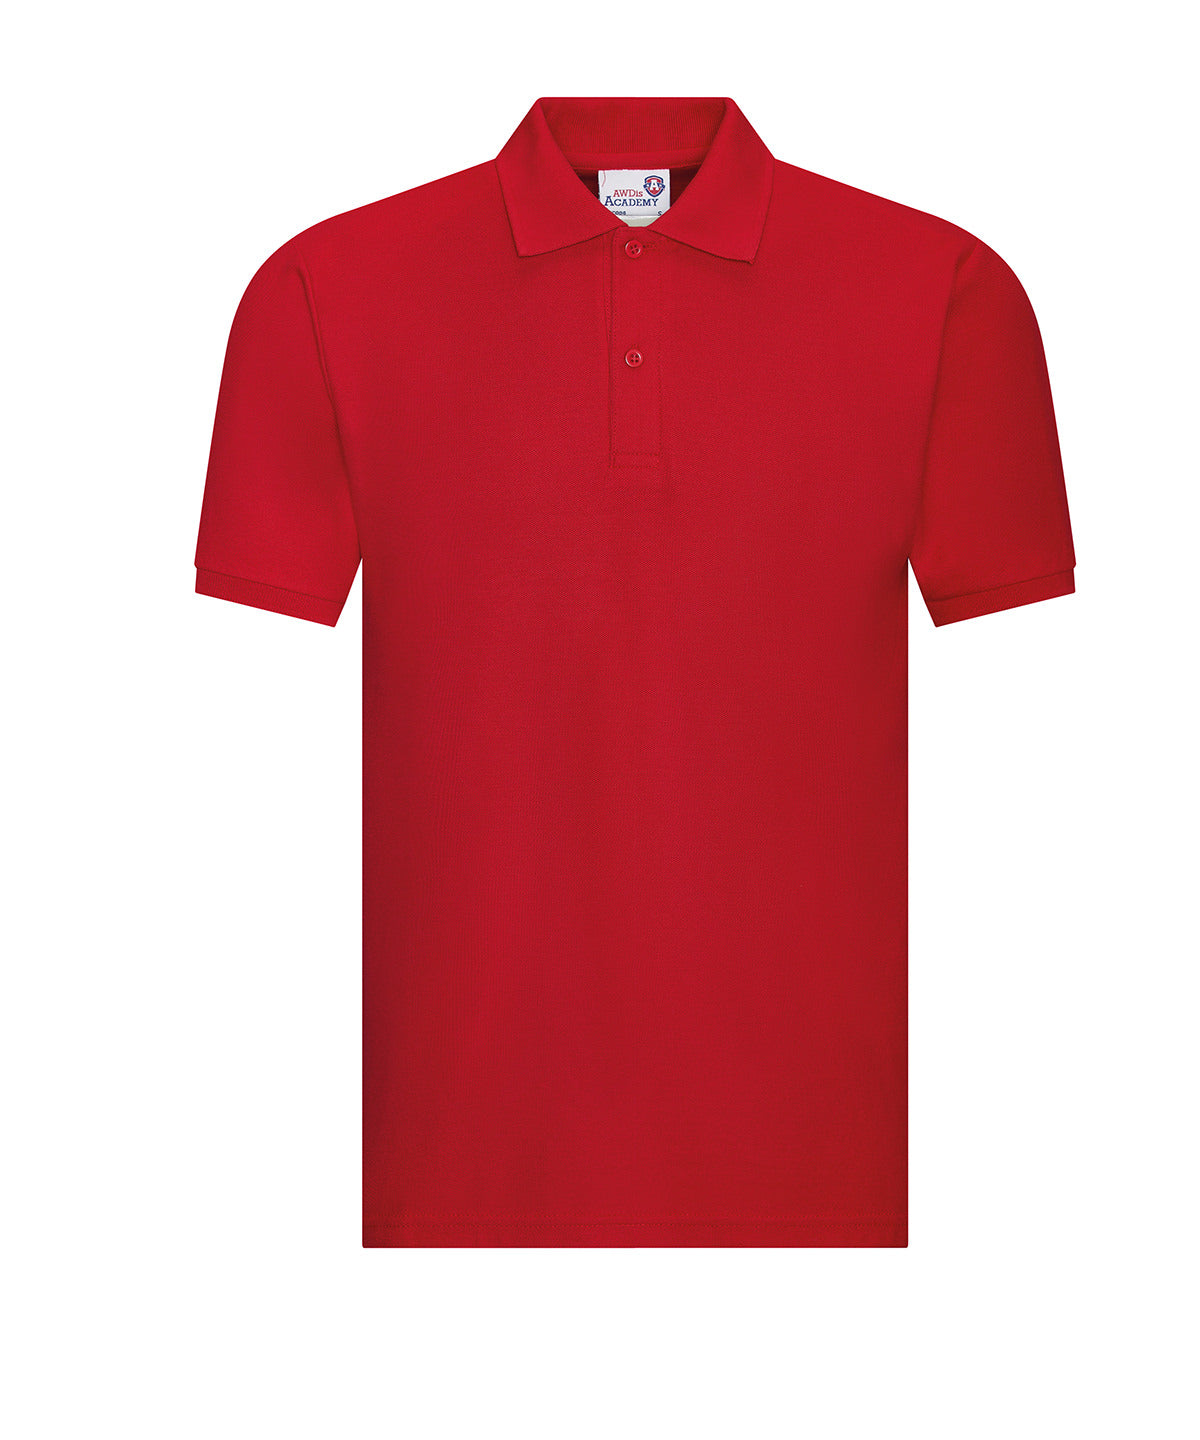 Personalised Polo Shirts - Mid Red AWDis Academy Academy polo